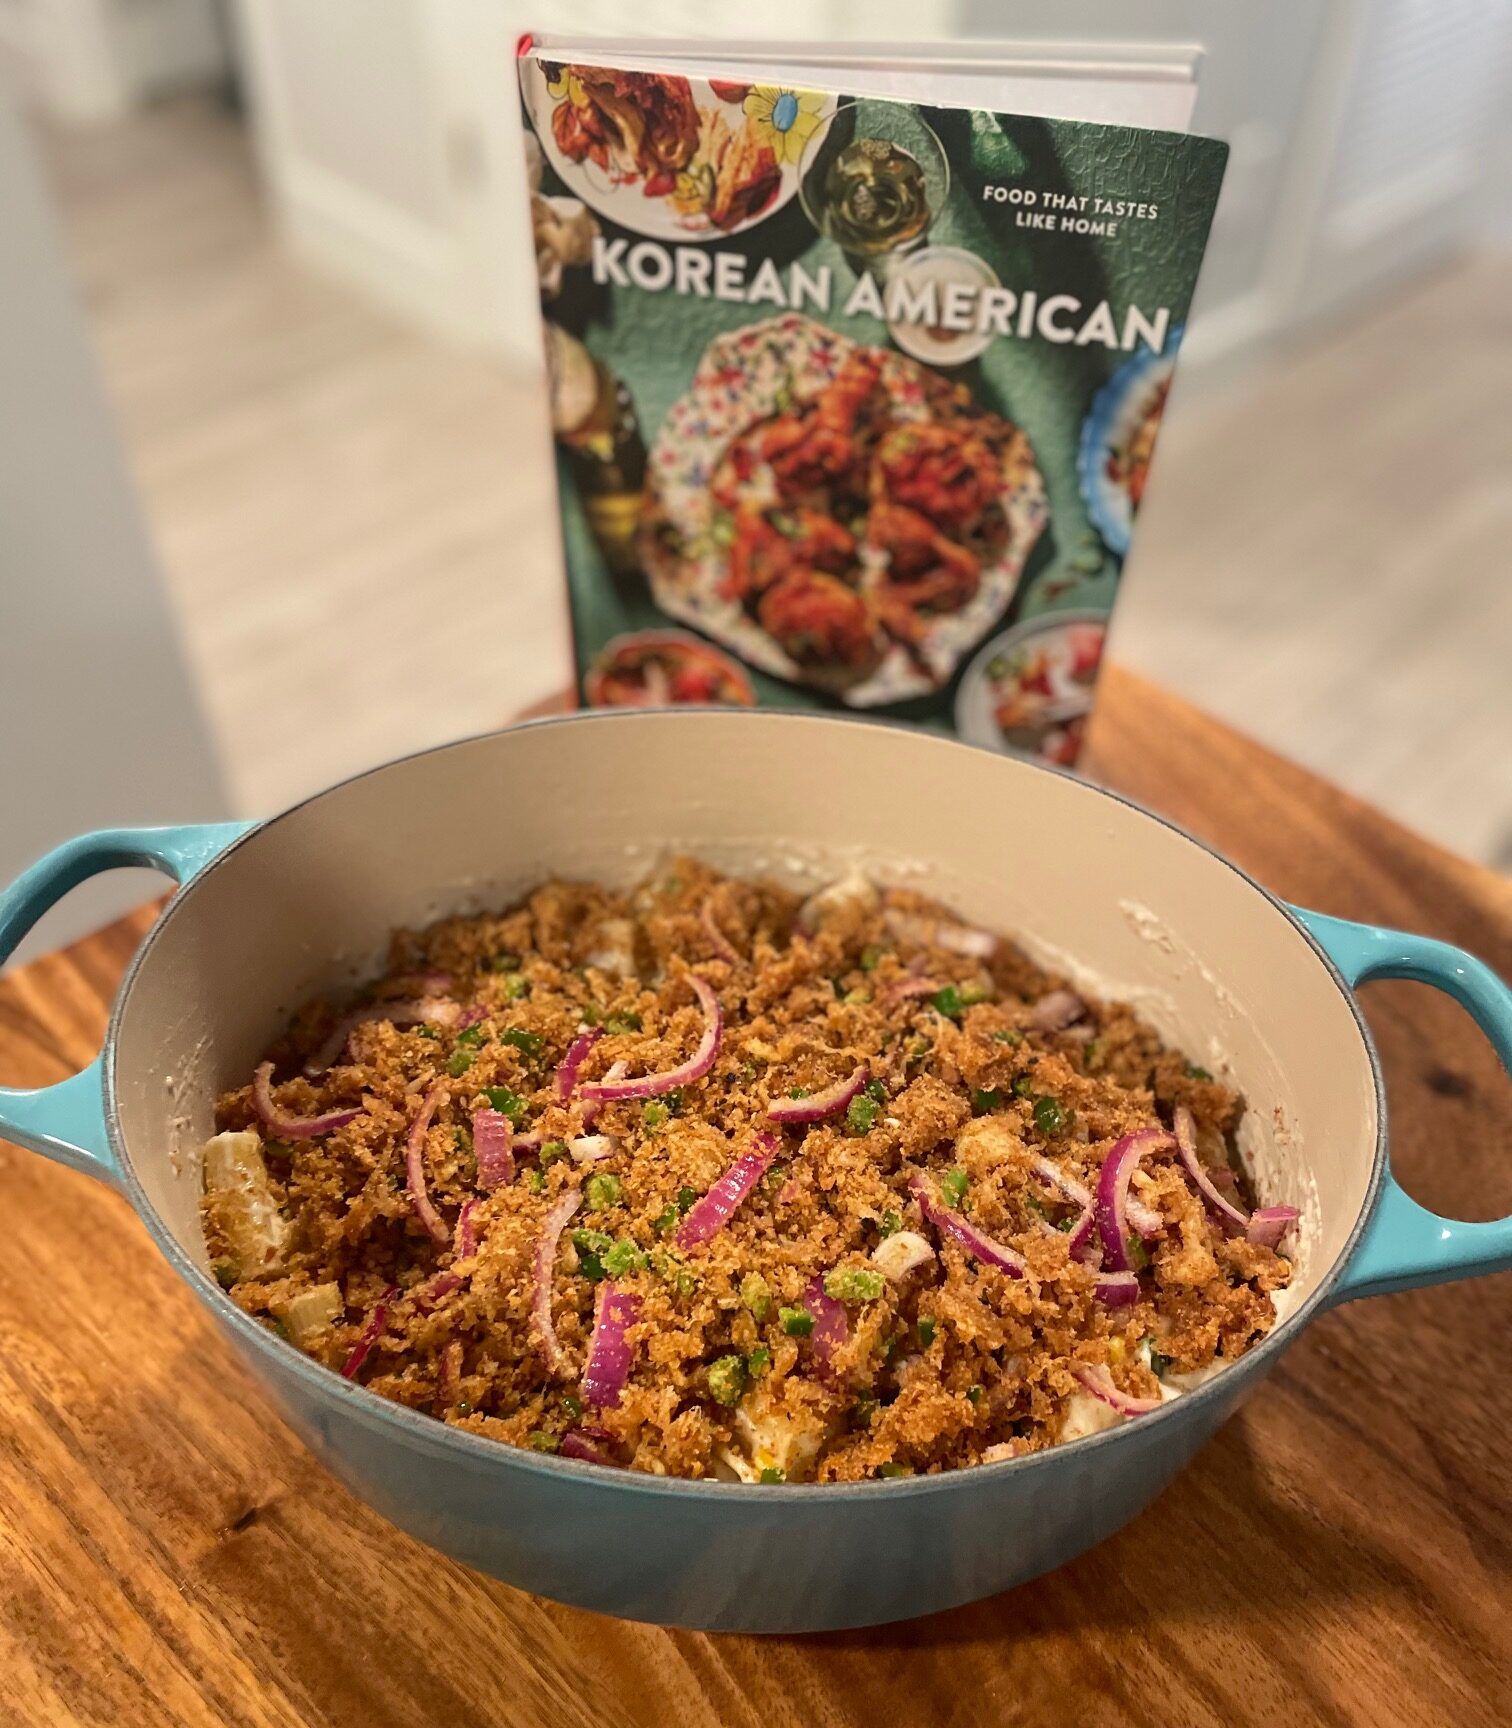 A teal dutch over full of a cheesy pasta topped with panko bread crumbs, red onion, and jalapeno. It sits on a wooden table in front of the cookbook Korean American